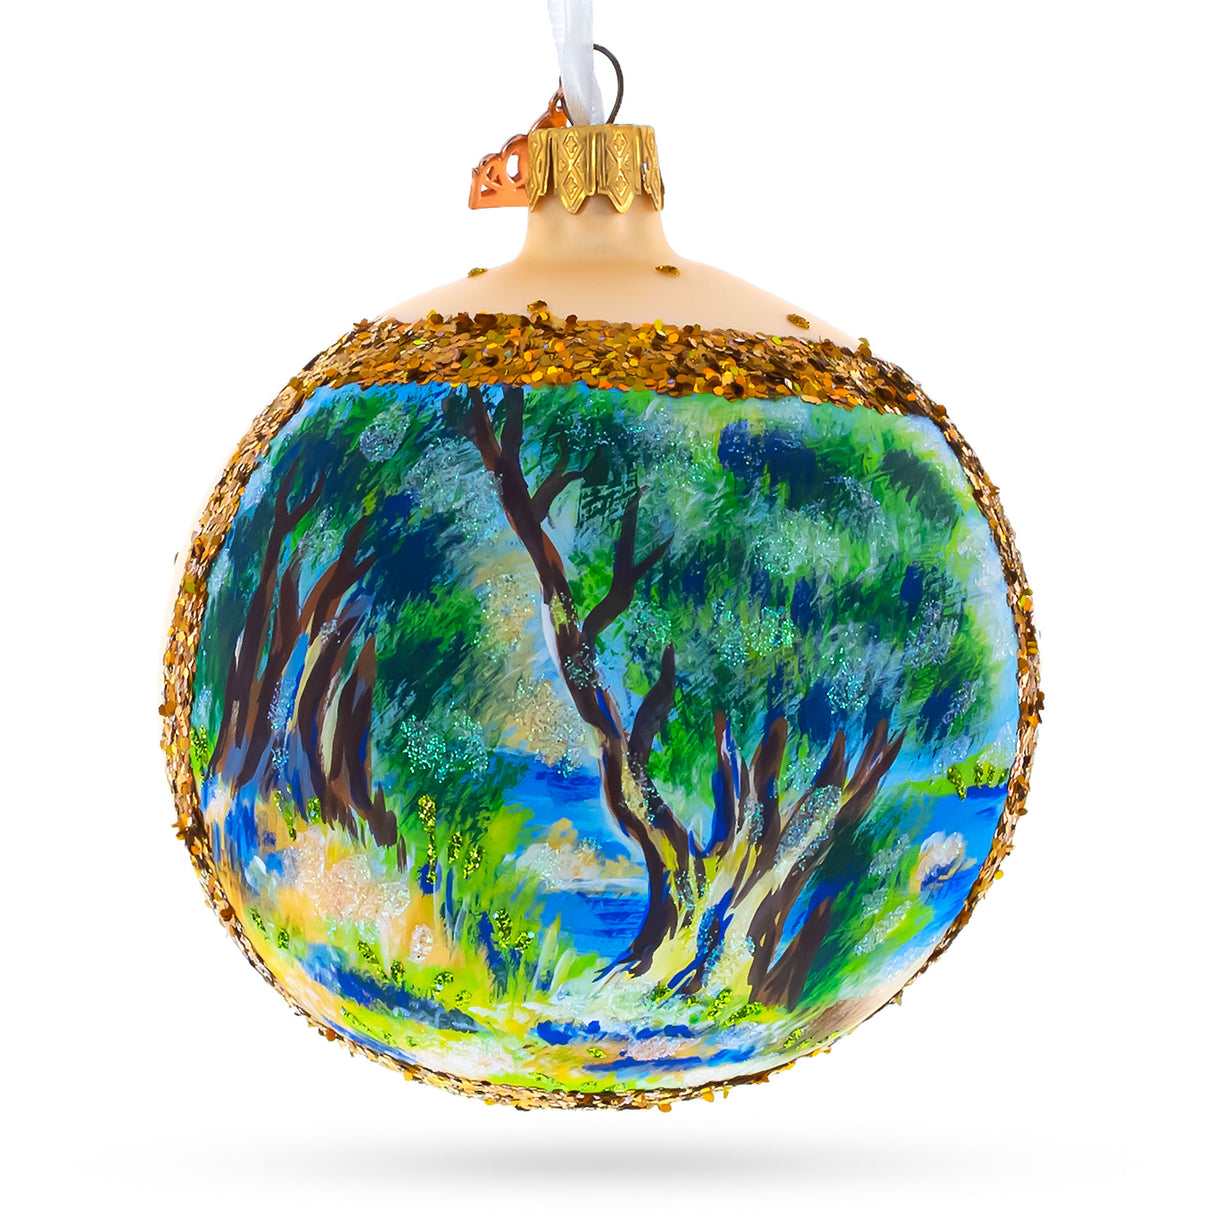 Glass 1883 Pierre-Auguste Renoir "Landscape on the Coast, near Menton" Glass Ball Christmas Ornament 4 Inches in Multi color Round